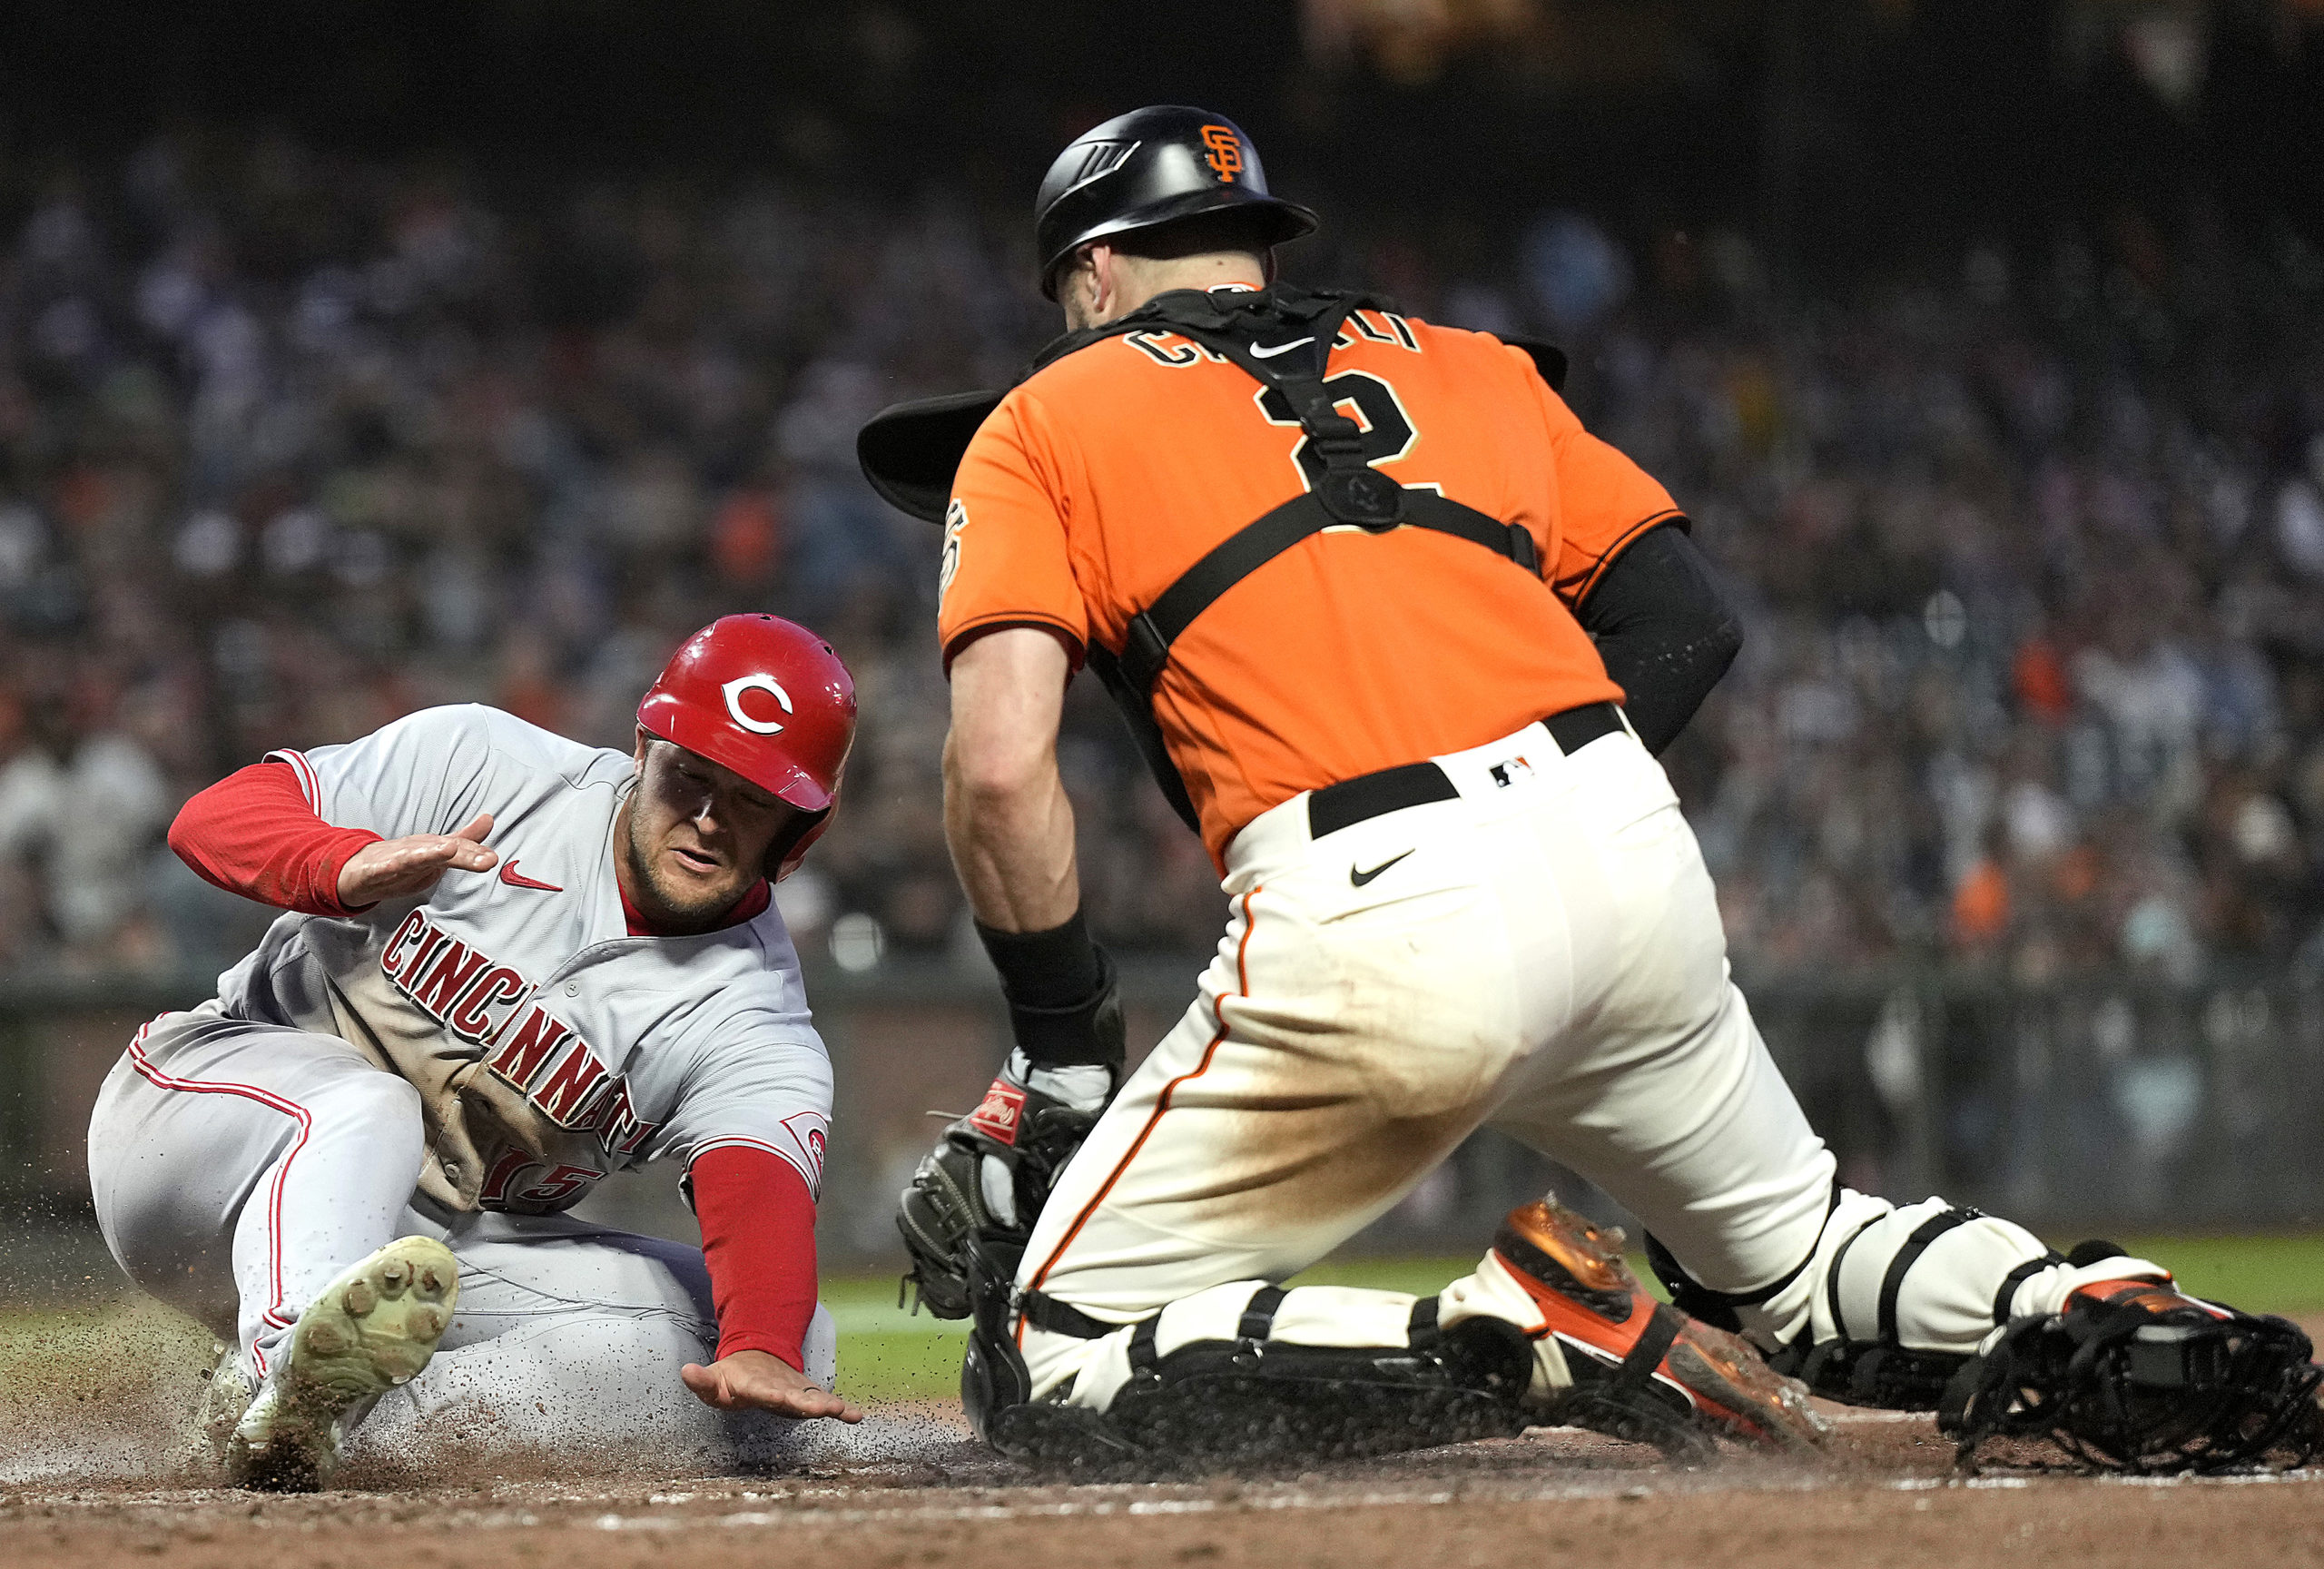 Nick Senzel of the Cincinnati Reds scores as Curt Casali of the San Francisco Giants can't handle t...